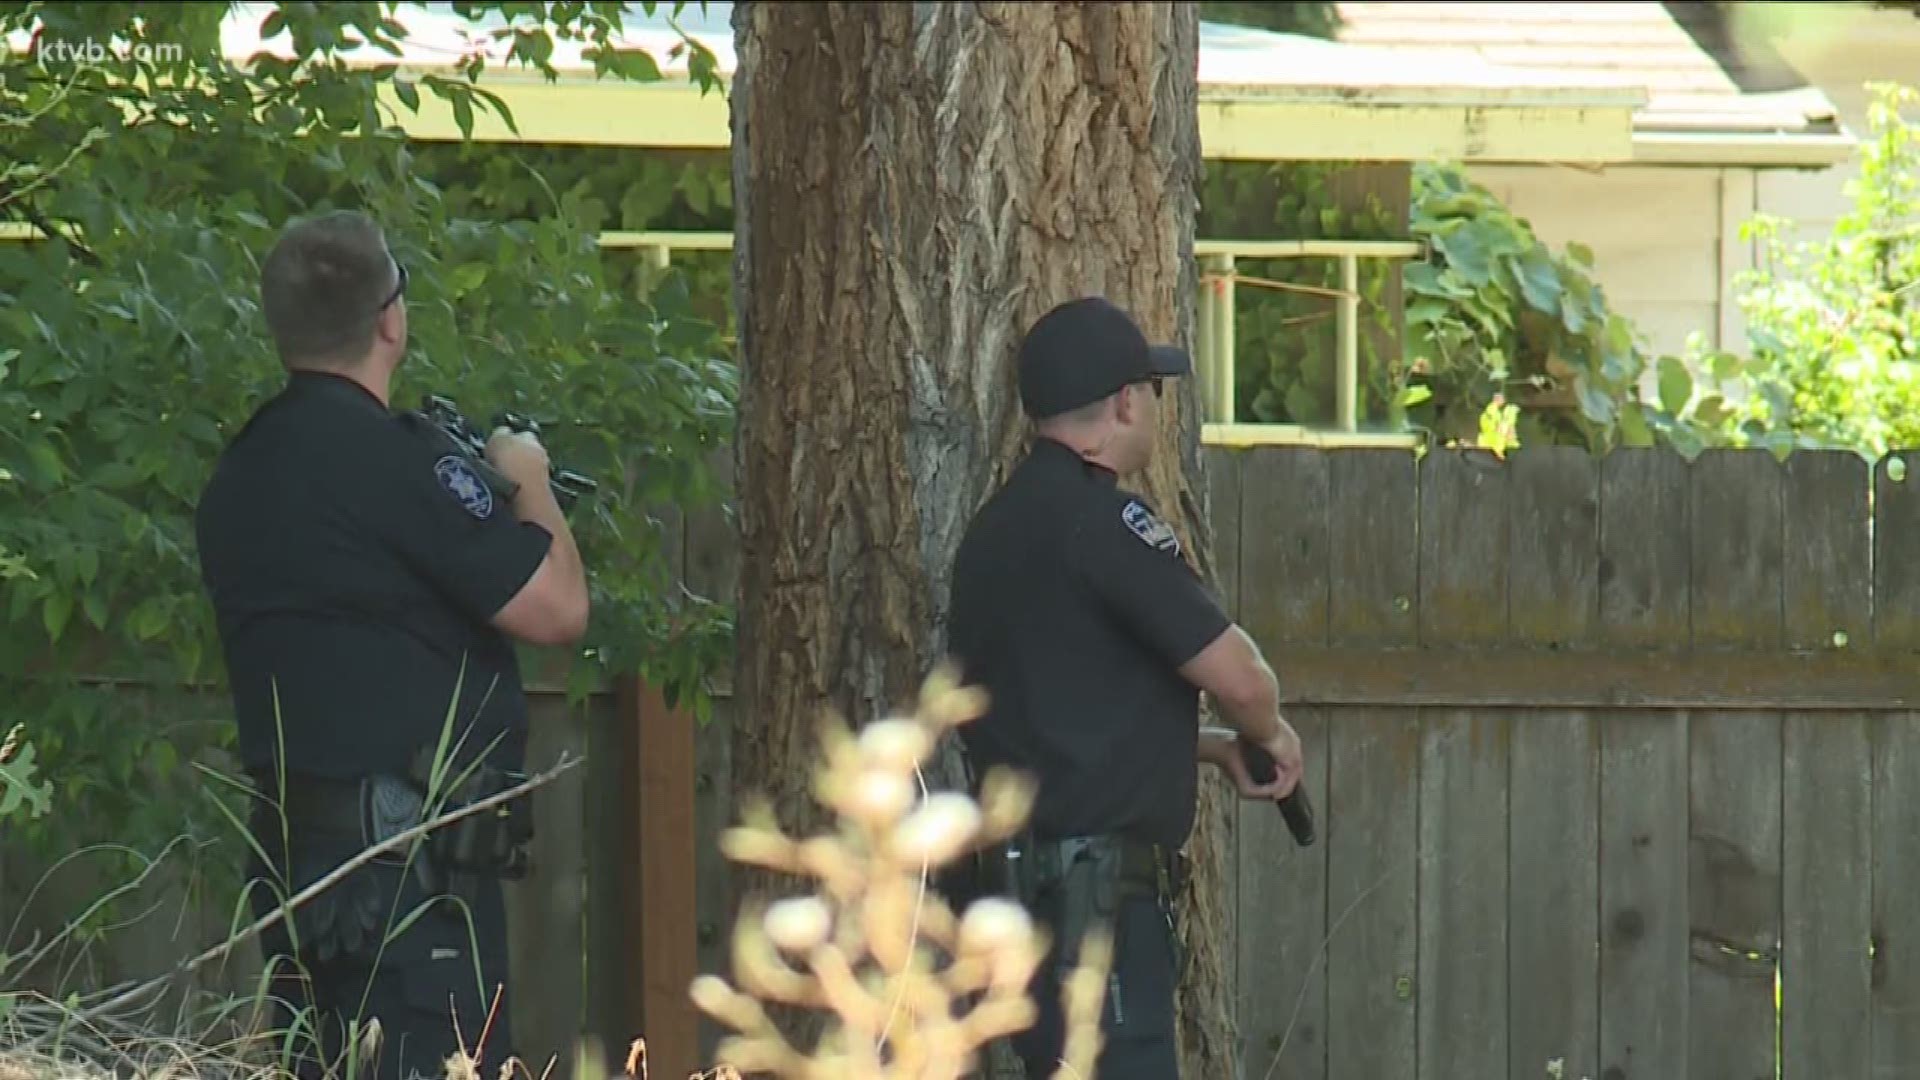 A neighborhood on the Boise Bench was on lockdown for almost an hour Sunday afternoon as Boise Police searched for an armed suspect. "Cops everywhere, motorcycles, police officers, all that kind of stuff," Joe Youman, who lives in the neighborhood, said.